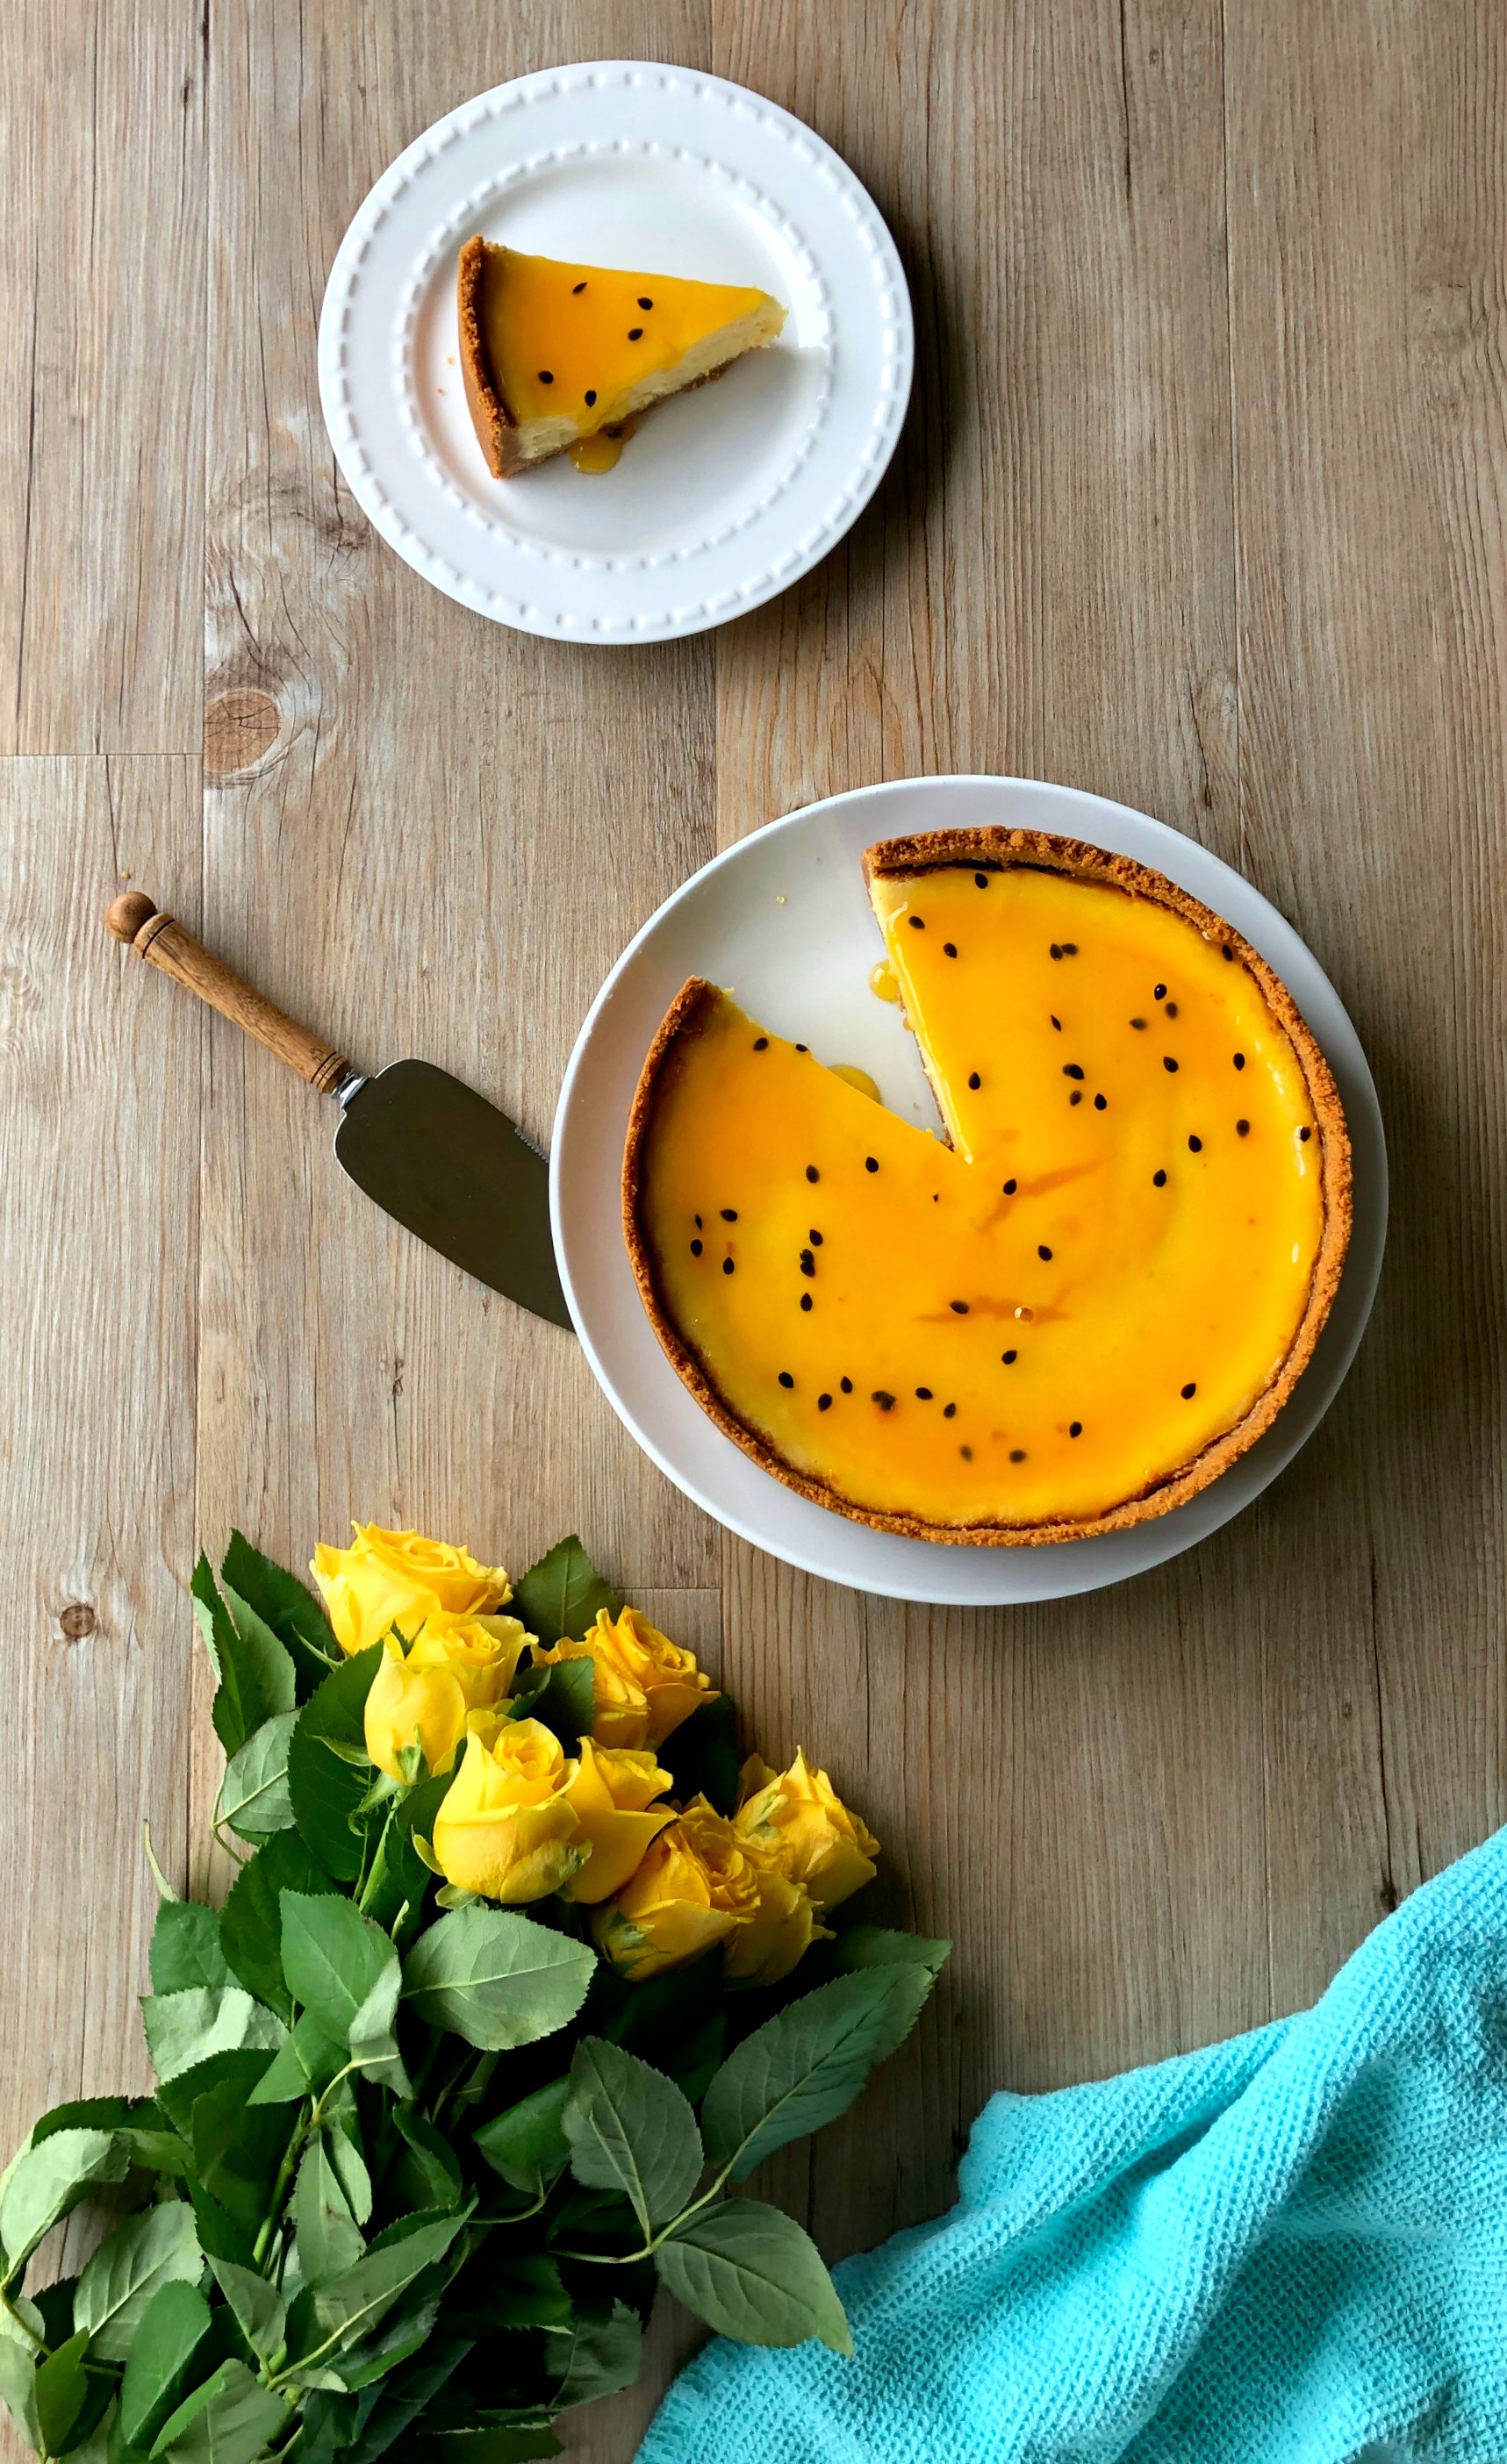 Easy Baked New York Cheesecake with Passionfruit Sauce